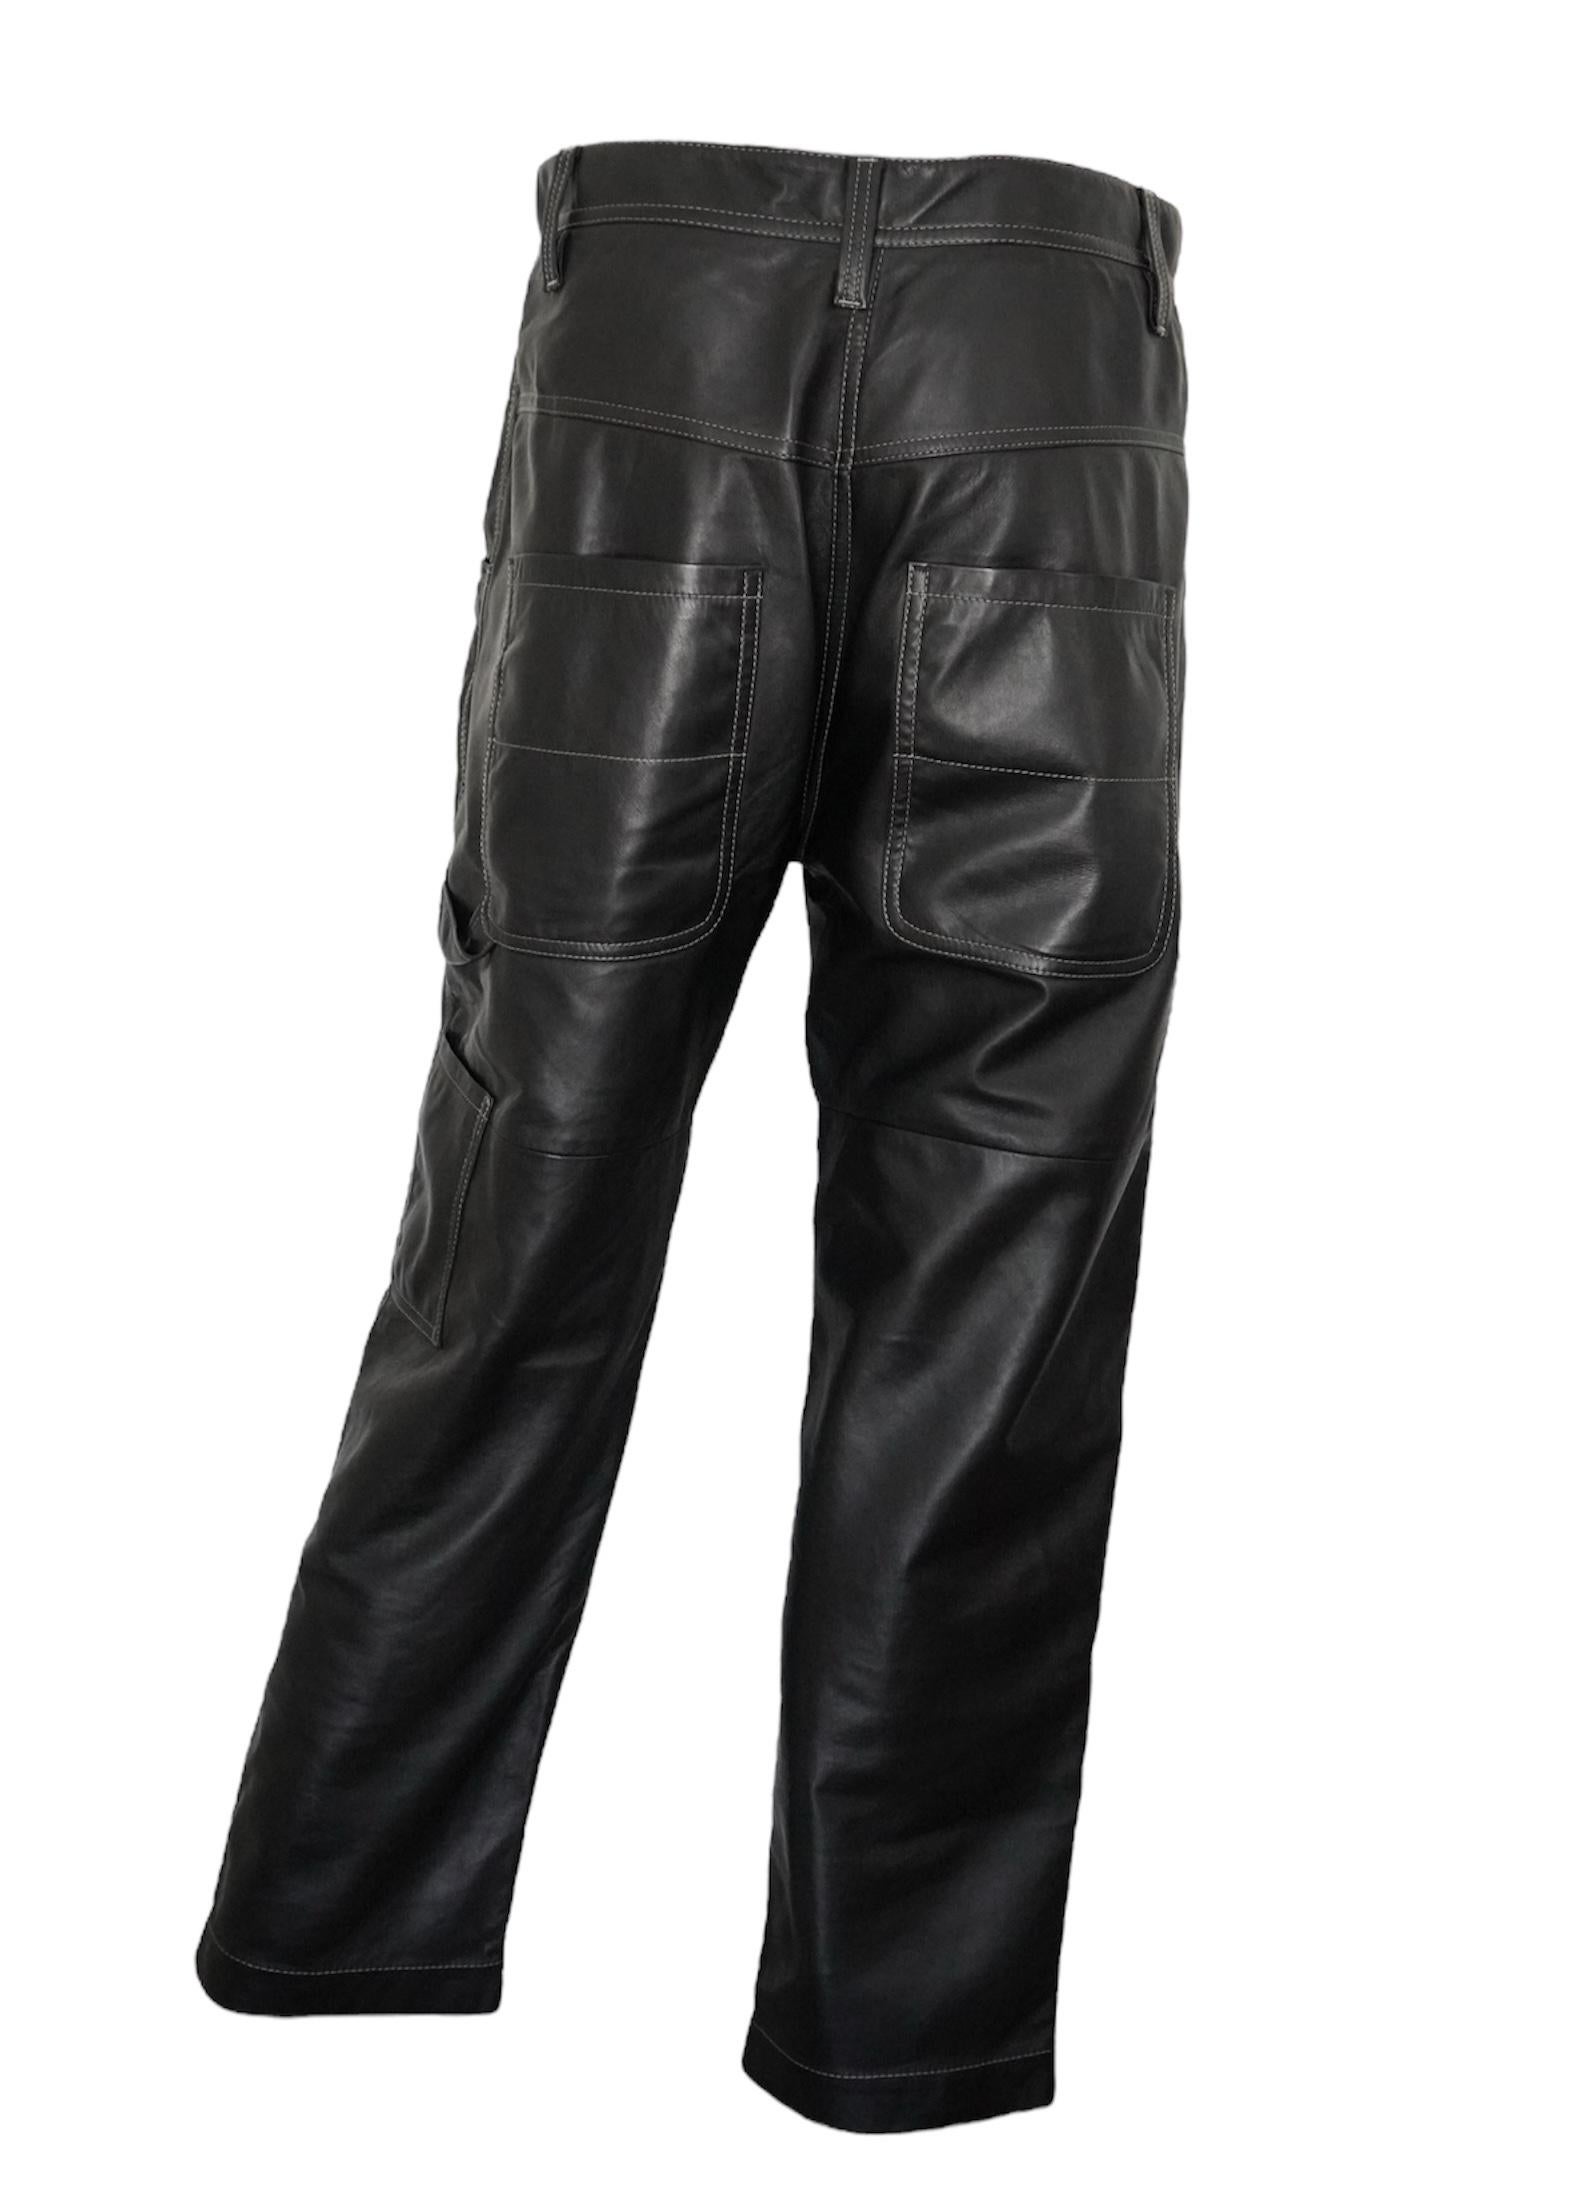 Brunello Cucinelli Black Leather Pants sz 6 In Good Condition For Sale In Beverly Hills, CA